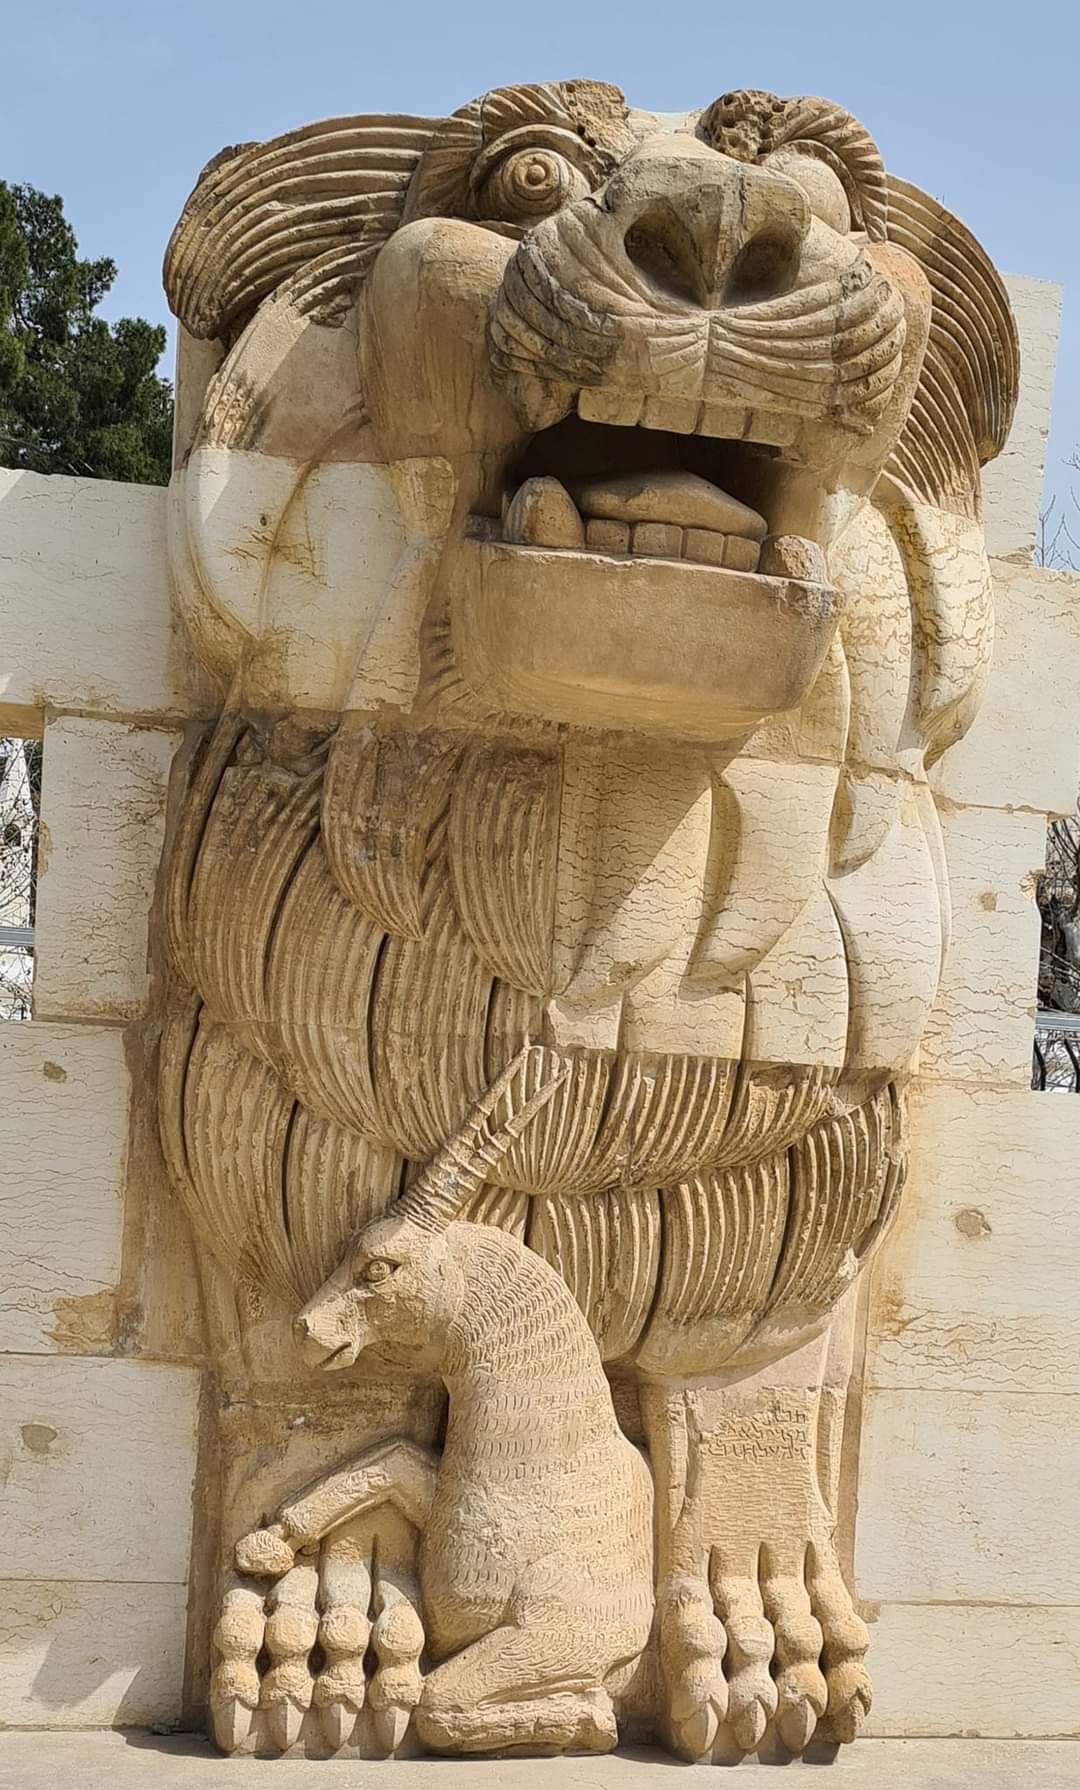 The famous Lion-of-Al from Palmyra